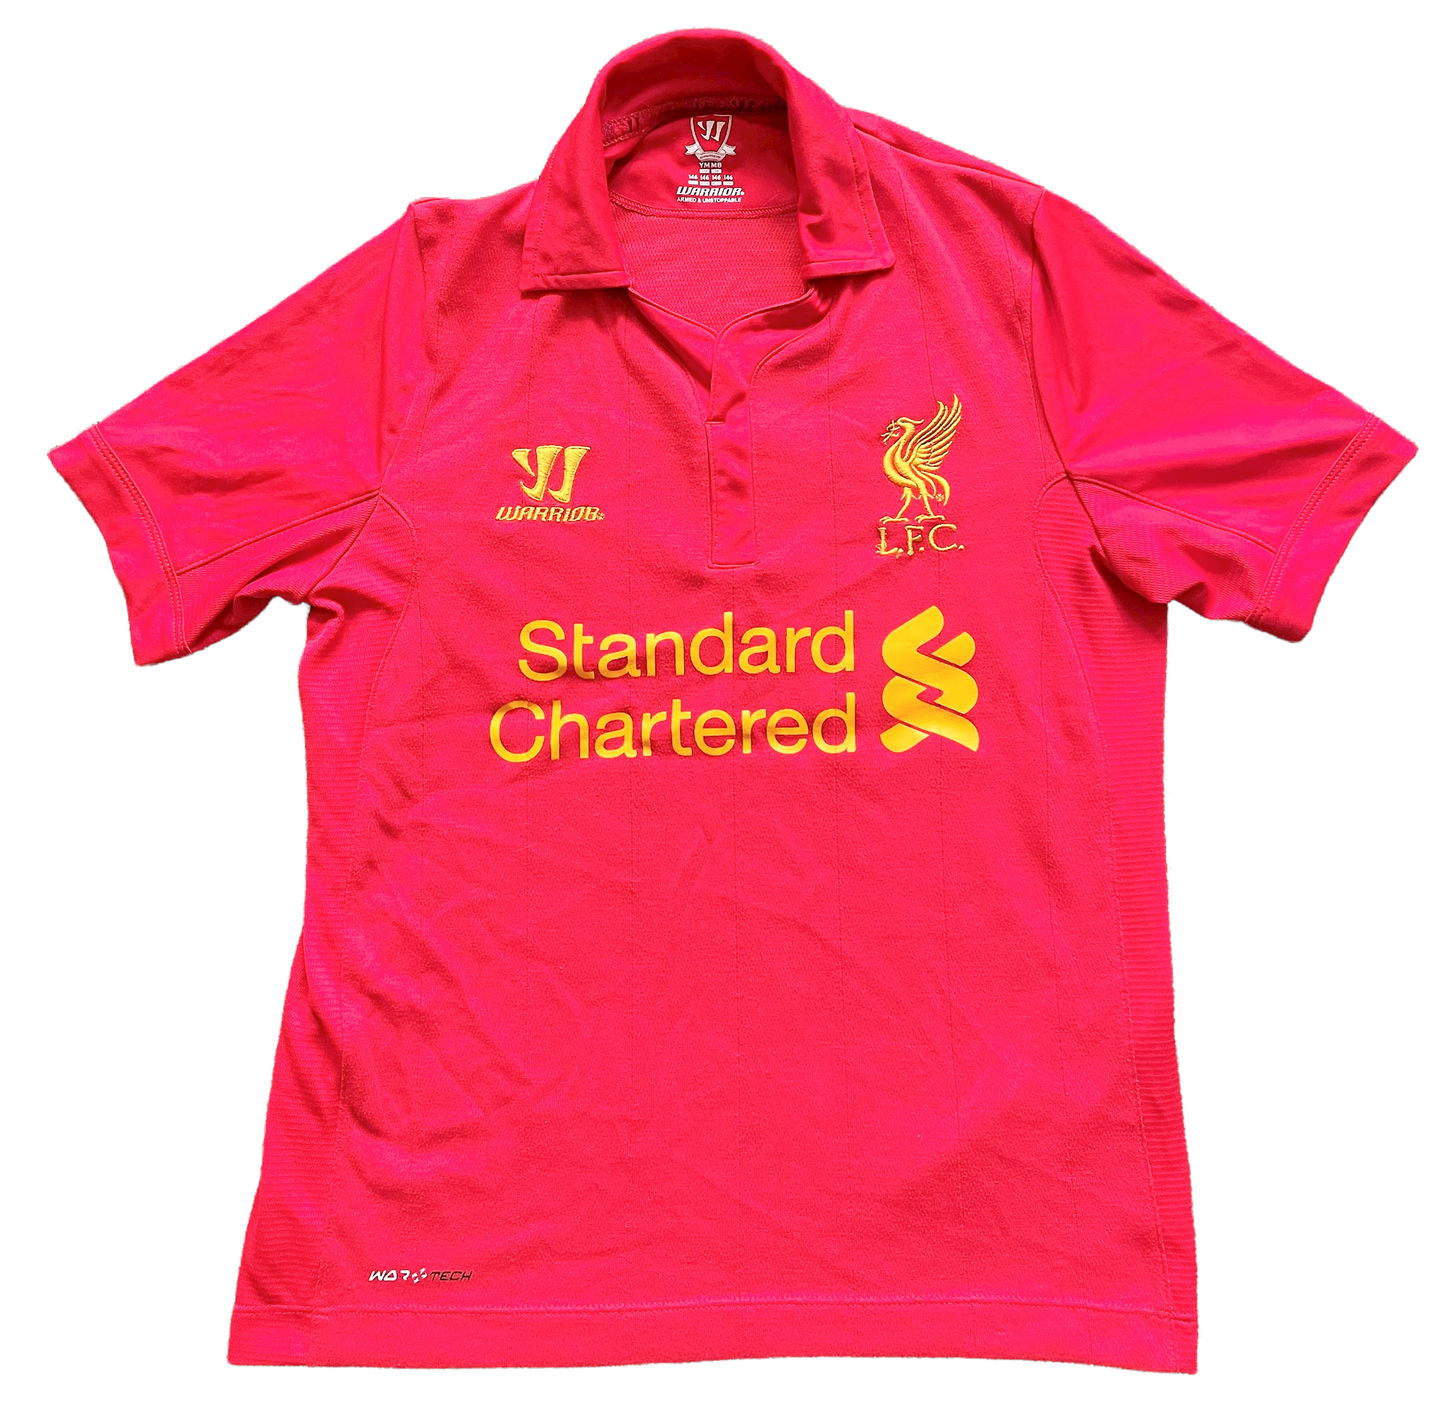 2012-13 Liverpool Home Shirt (excellent) Small Boys